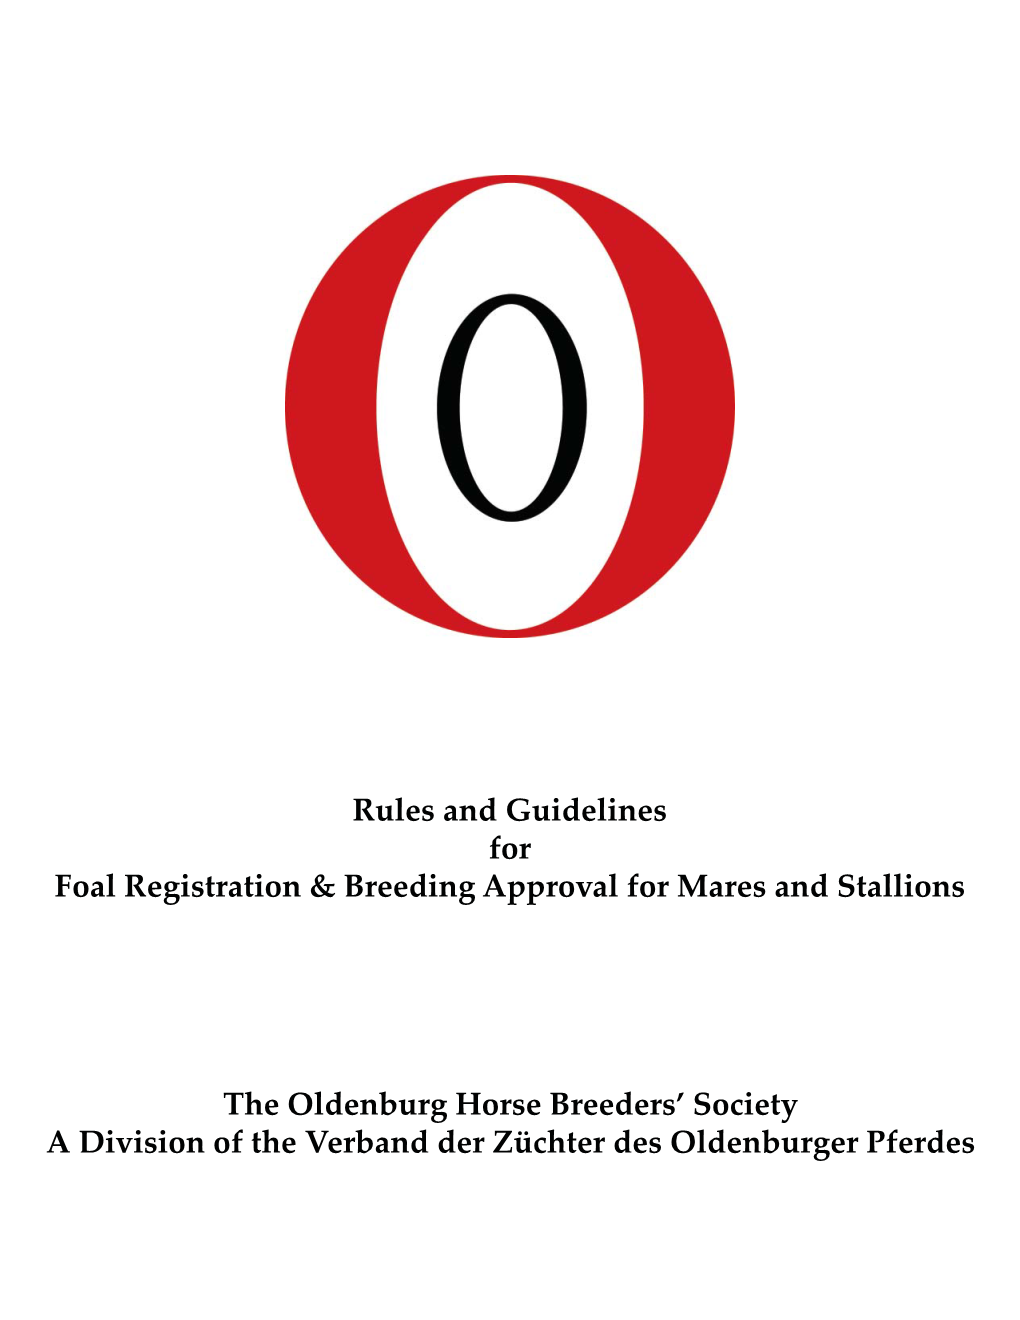 The Oldenburg Horse Breeders' Society a Division of the Verband